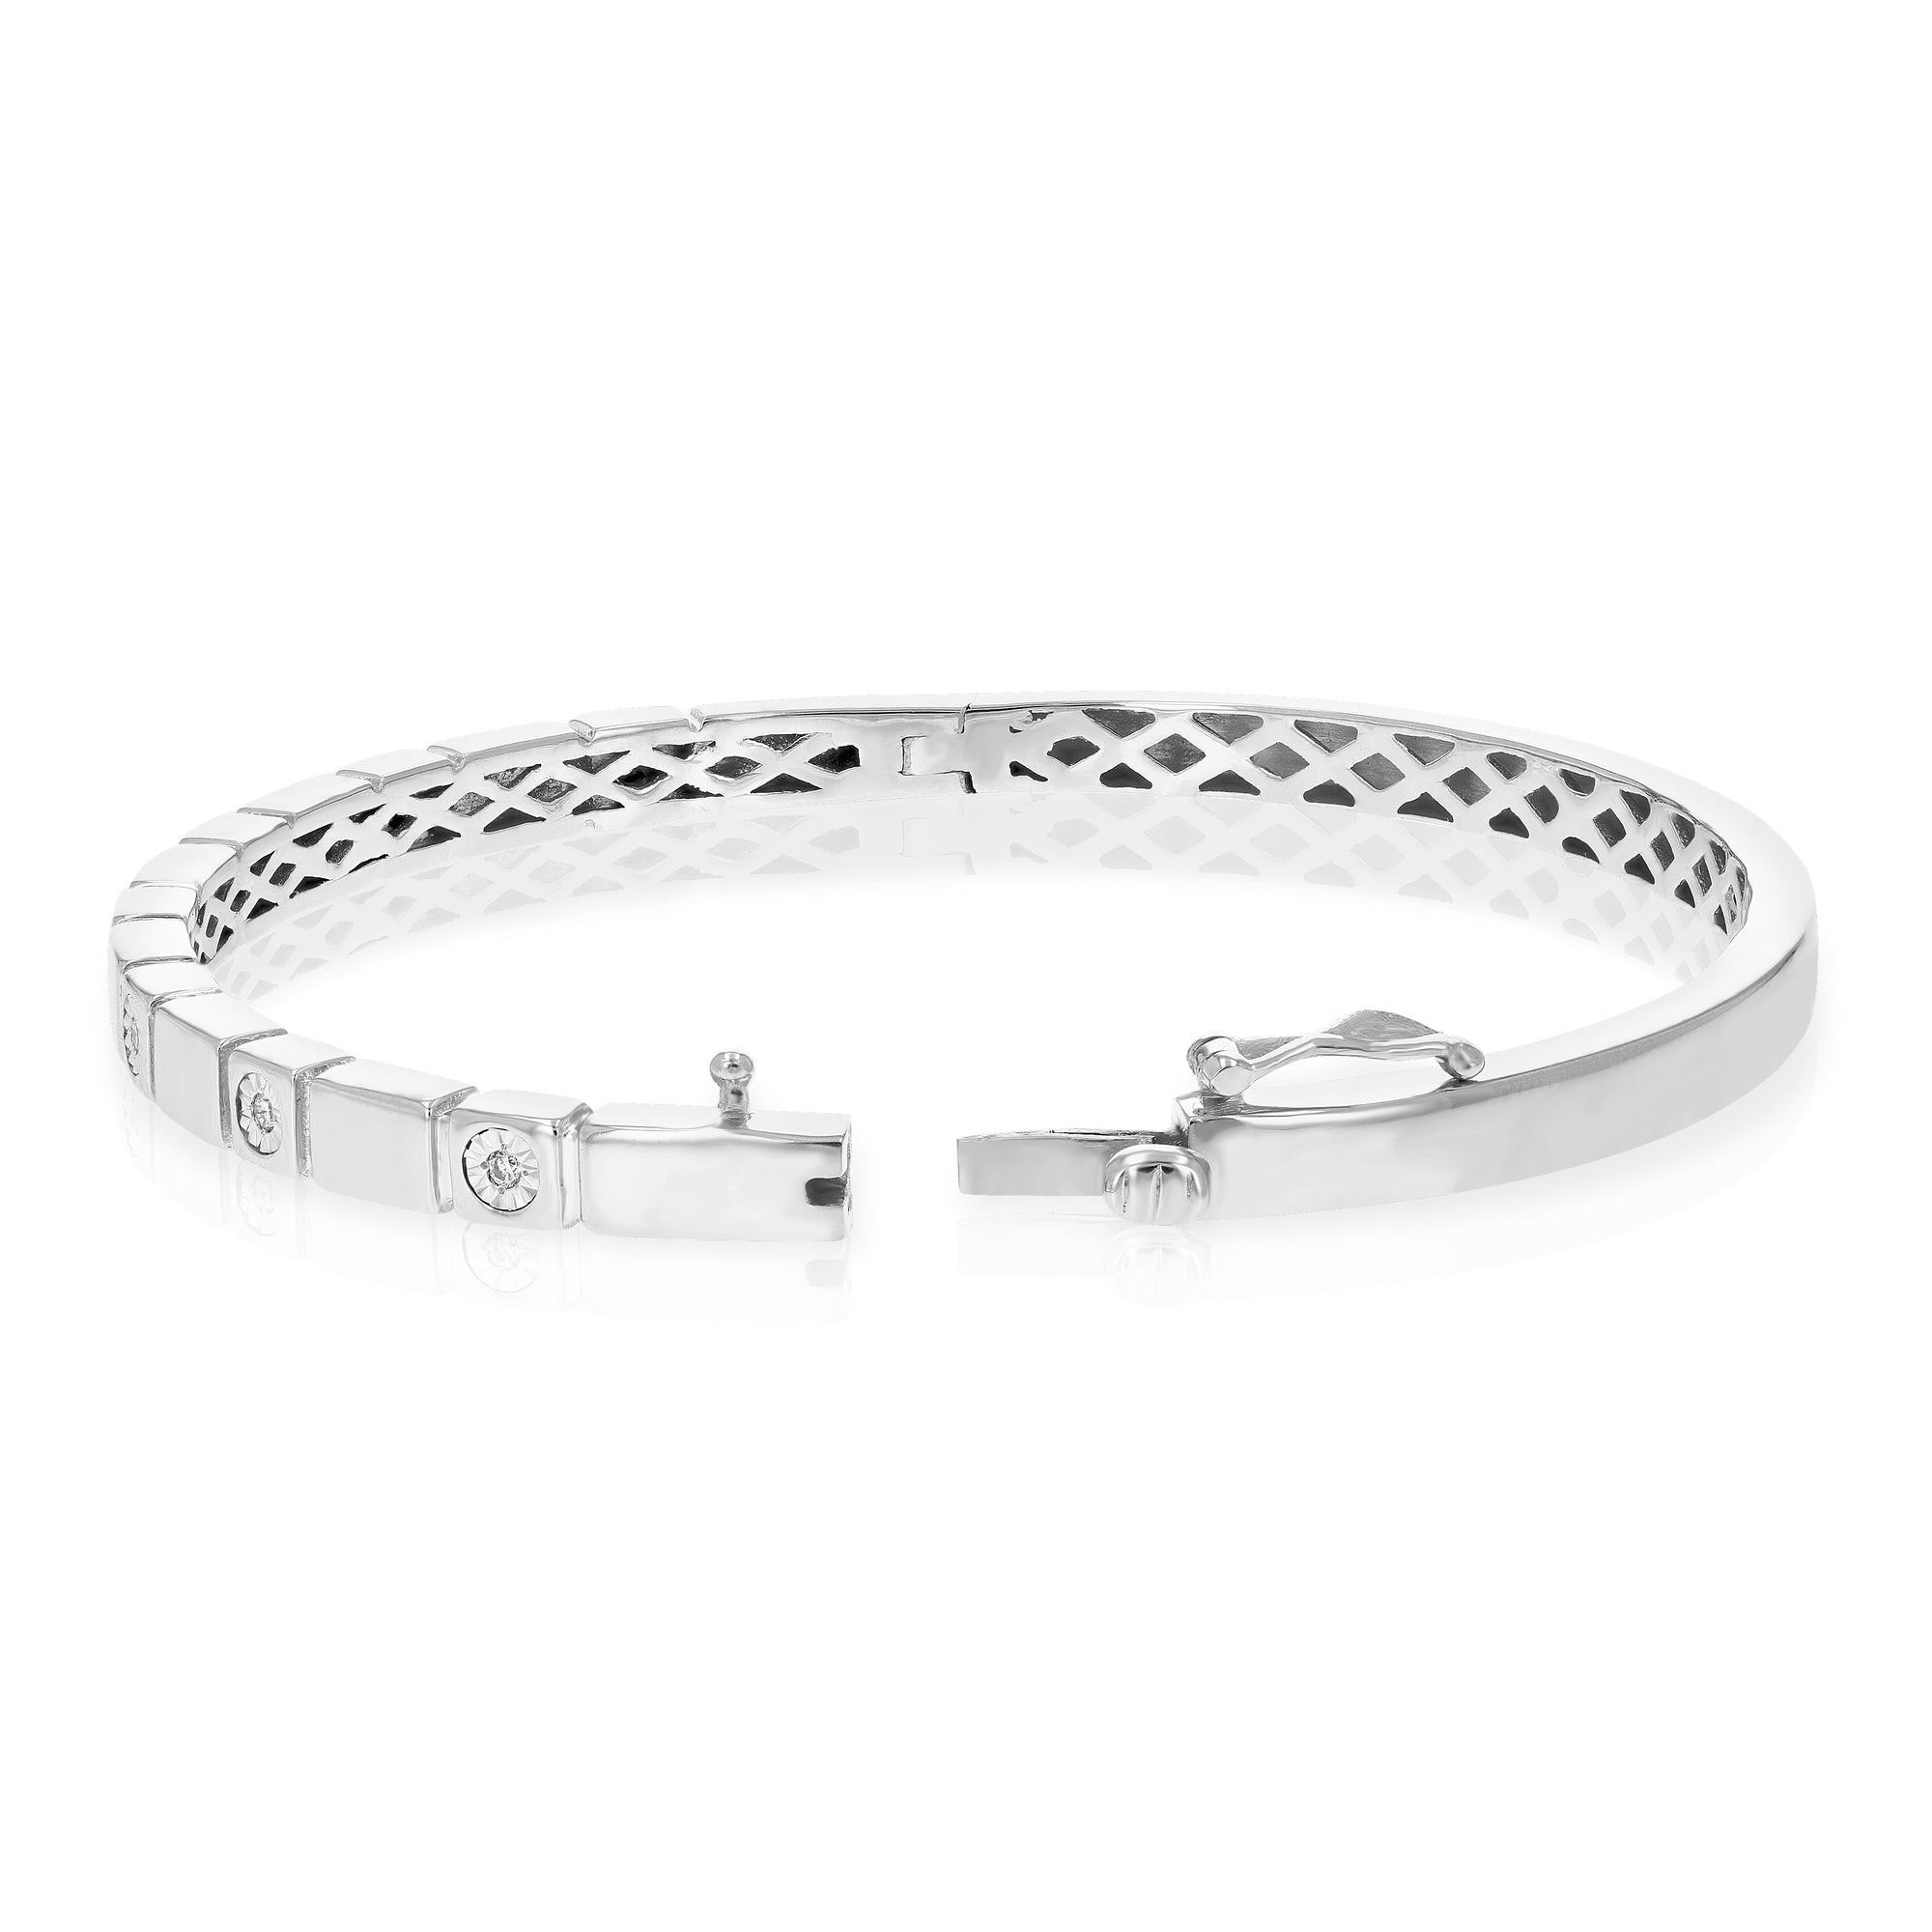 1/12 cttw Round Cut Lab Grown Diamond Bangle Bracelet in .925 Sterling Silver Prong Set